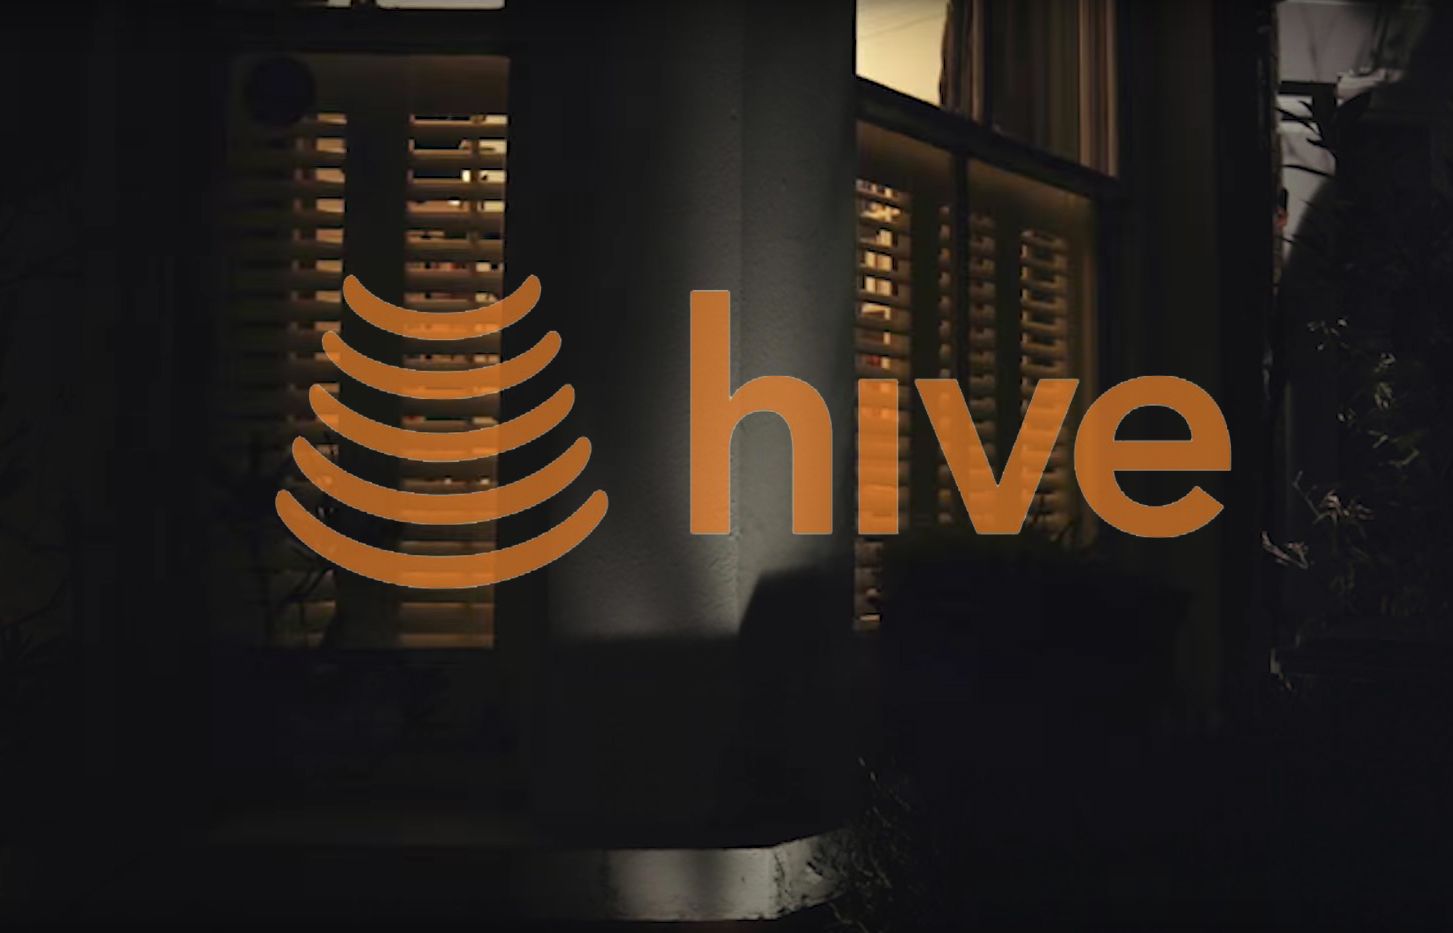 hive teases illuminating launch smart lighting predicted image 1